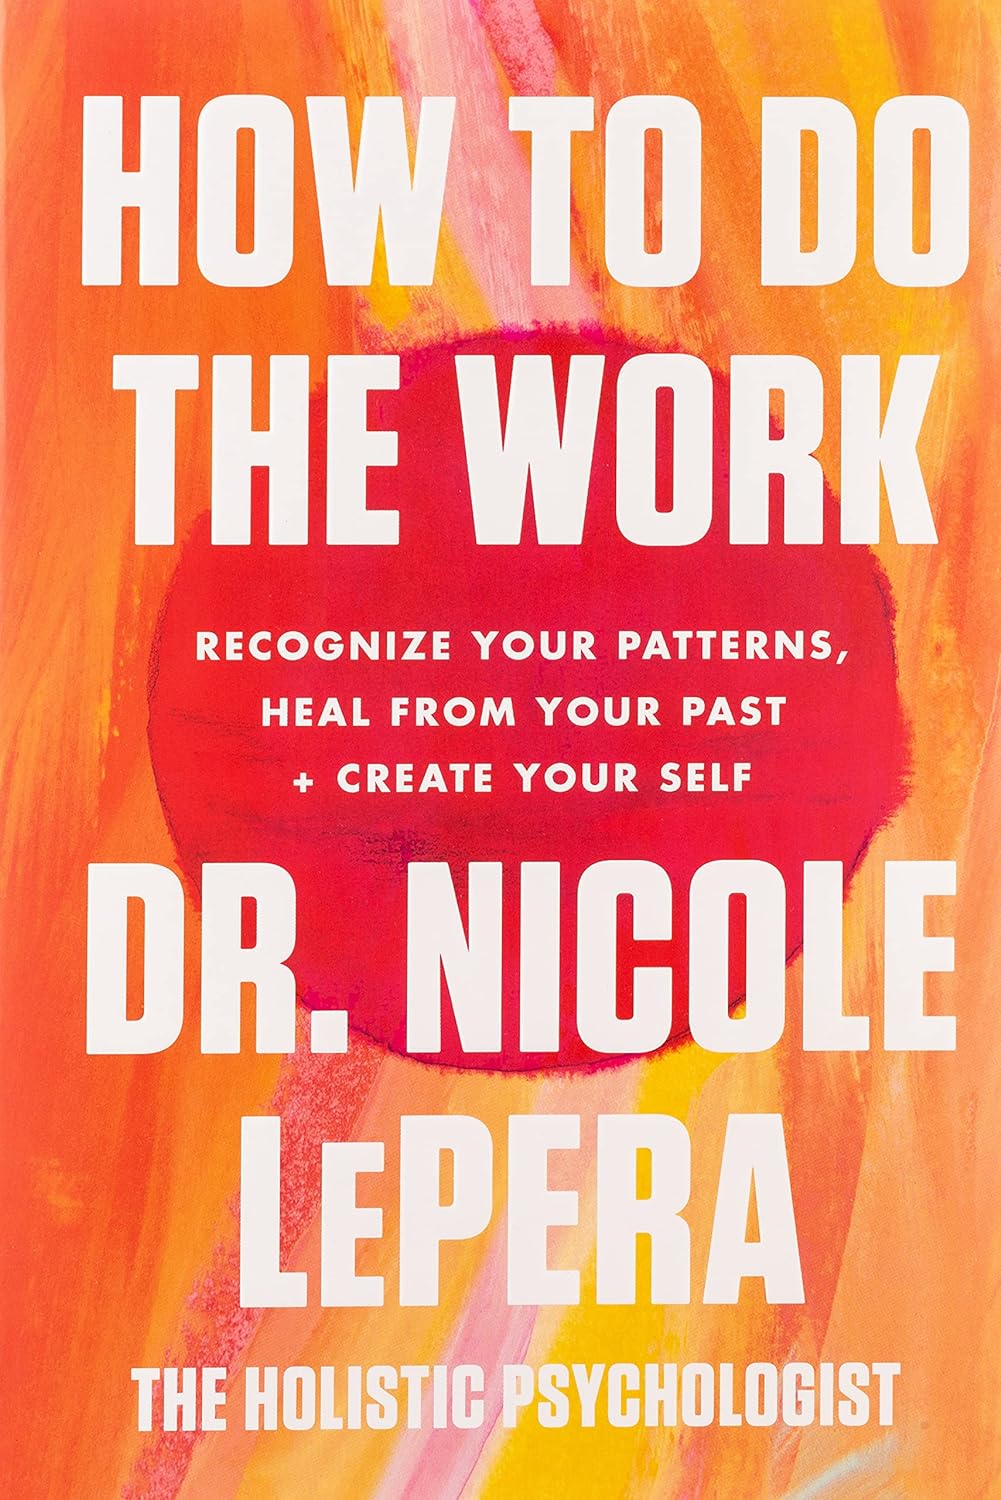 How To Do The Work: Recognize Your Patterns, Heal From Your Past, And Create Your Self [Nicole LePera]